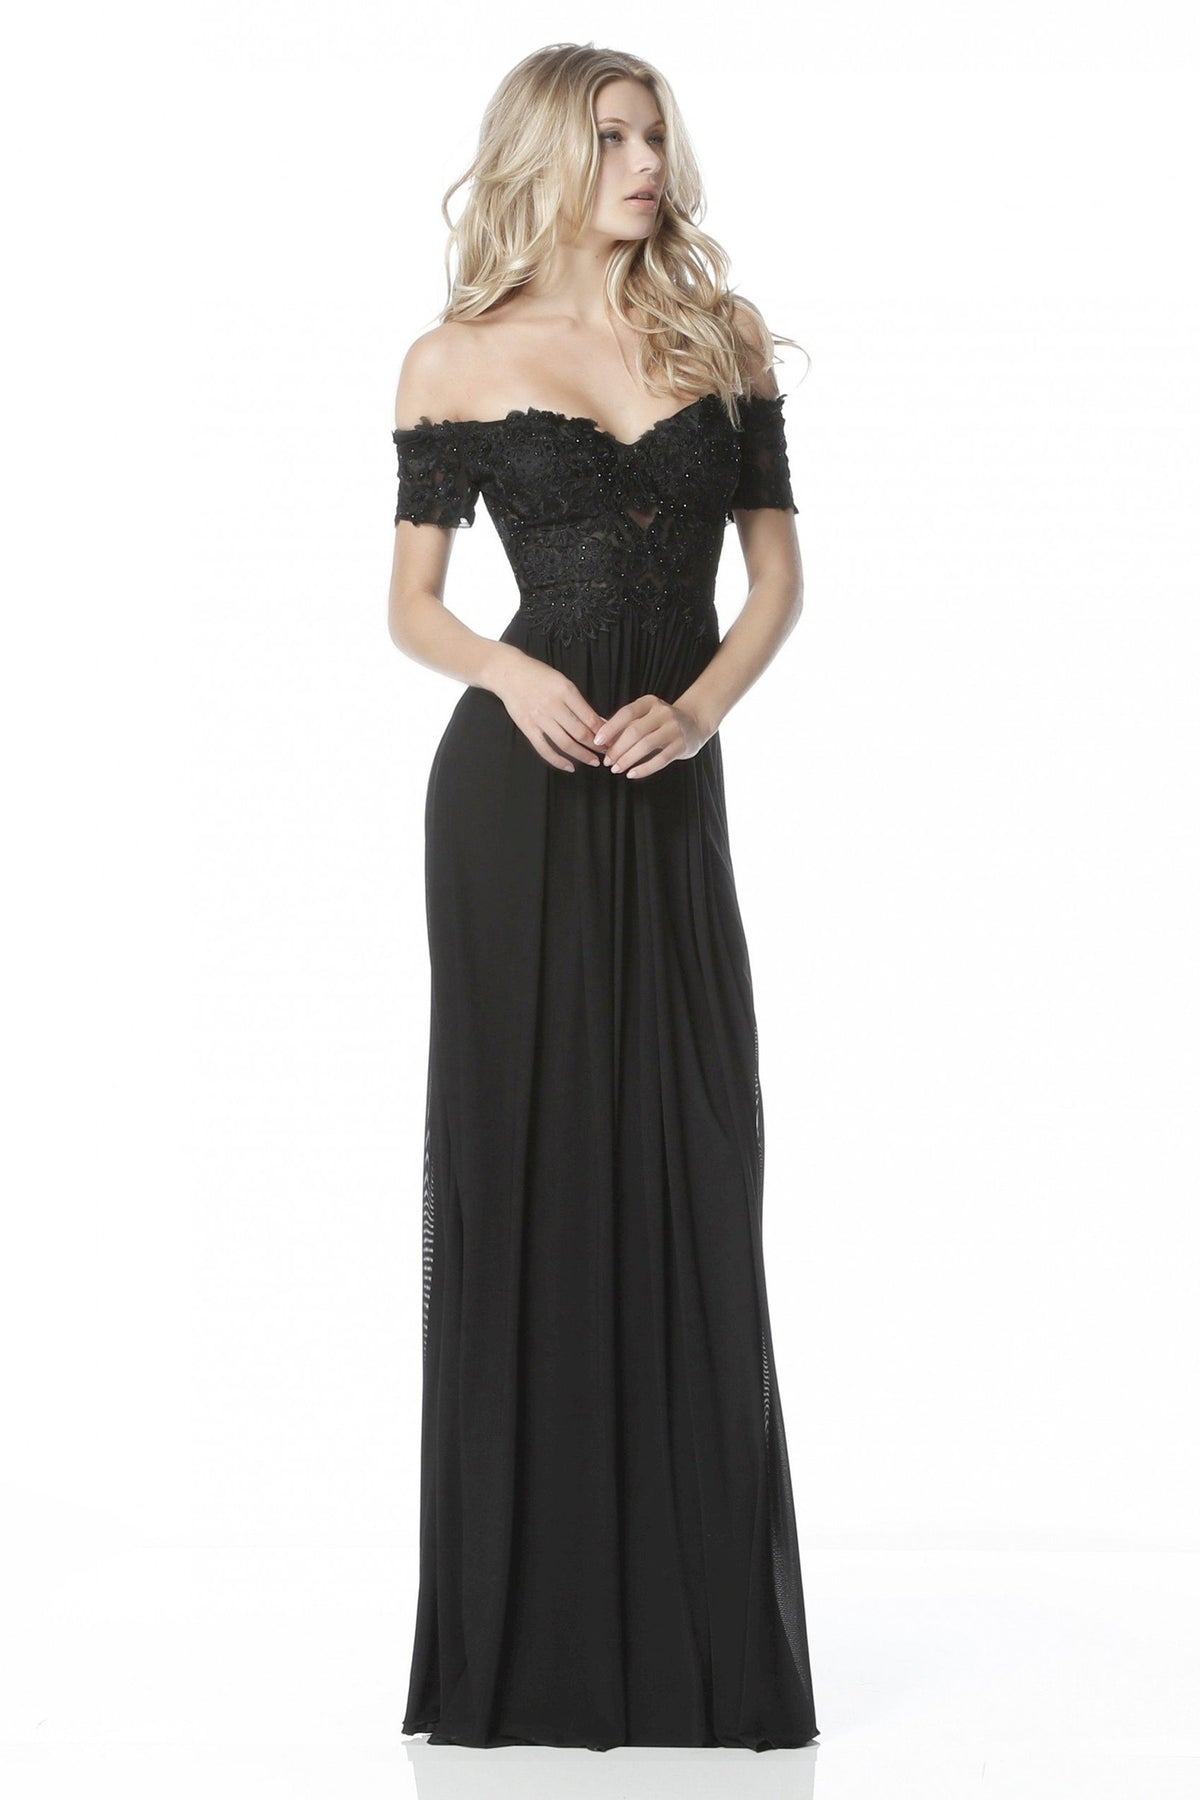 Sherri Hill - Beaded Lace Off-Shoulder A-Line Evening Gown 51556 In Black